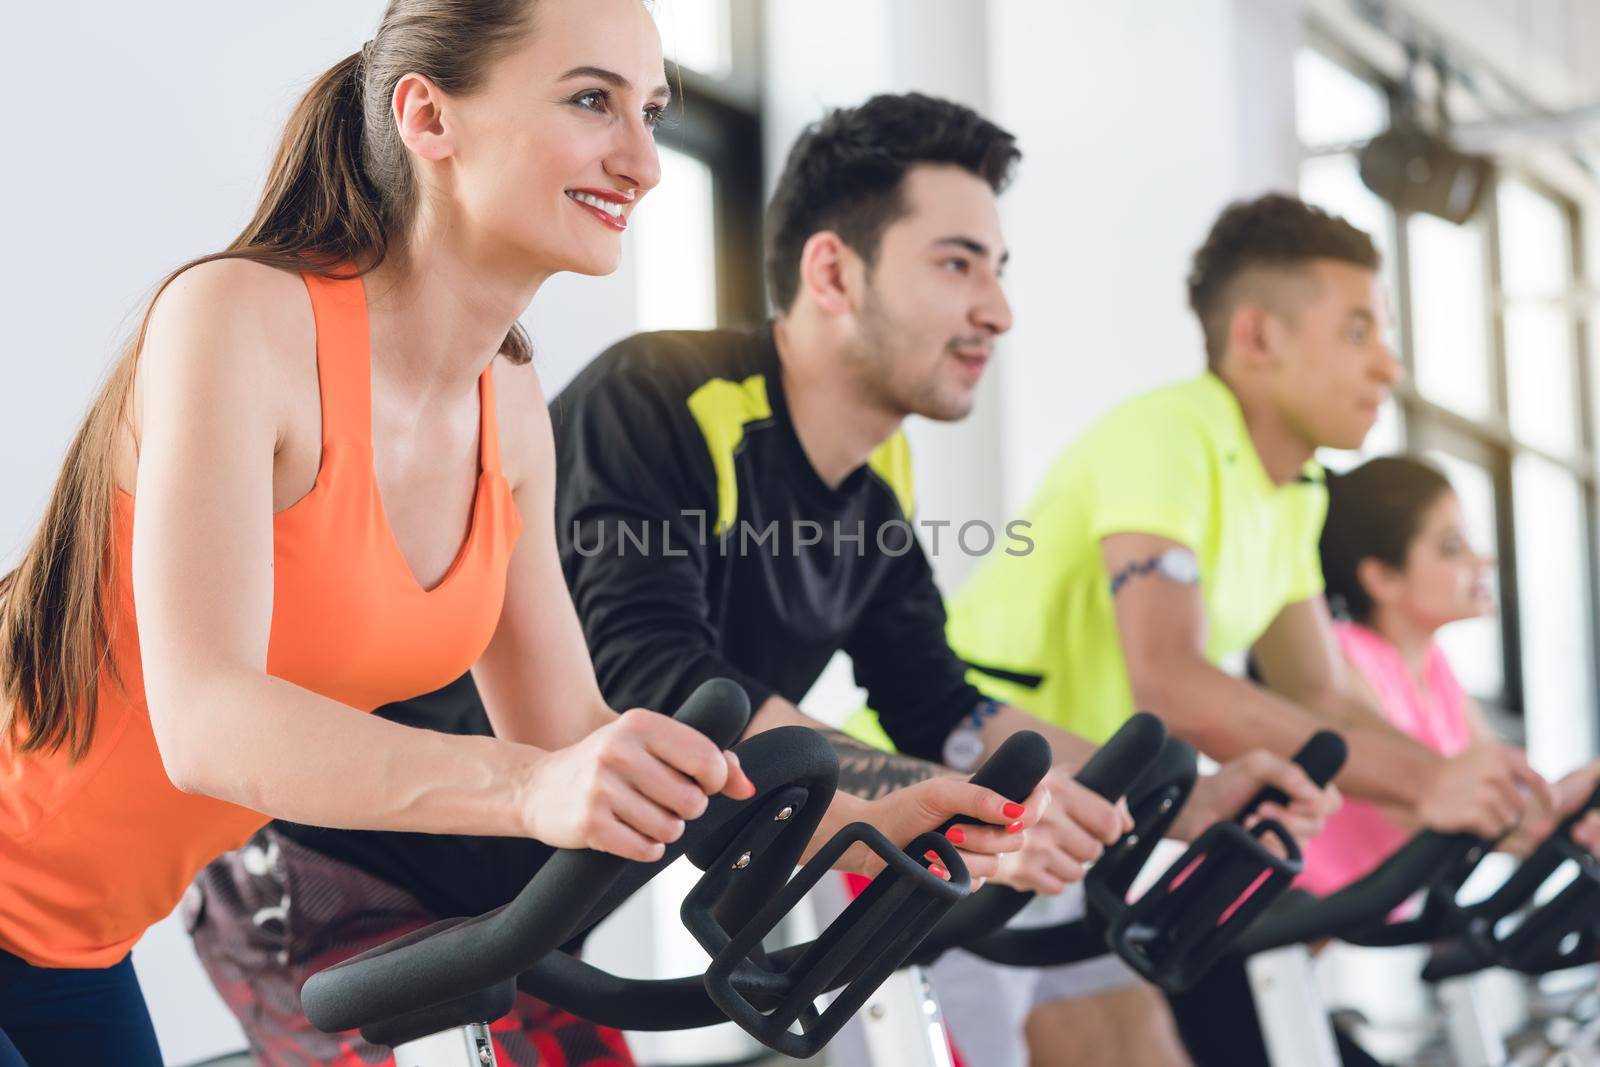 Healthy people exercising on cycle at the gym